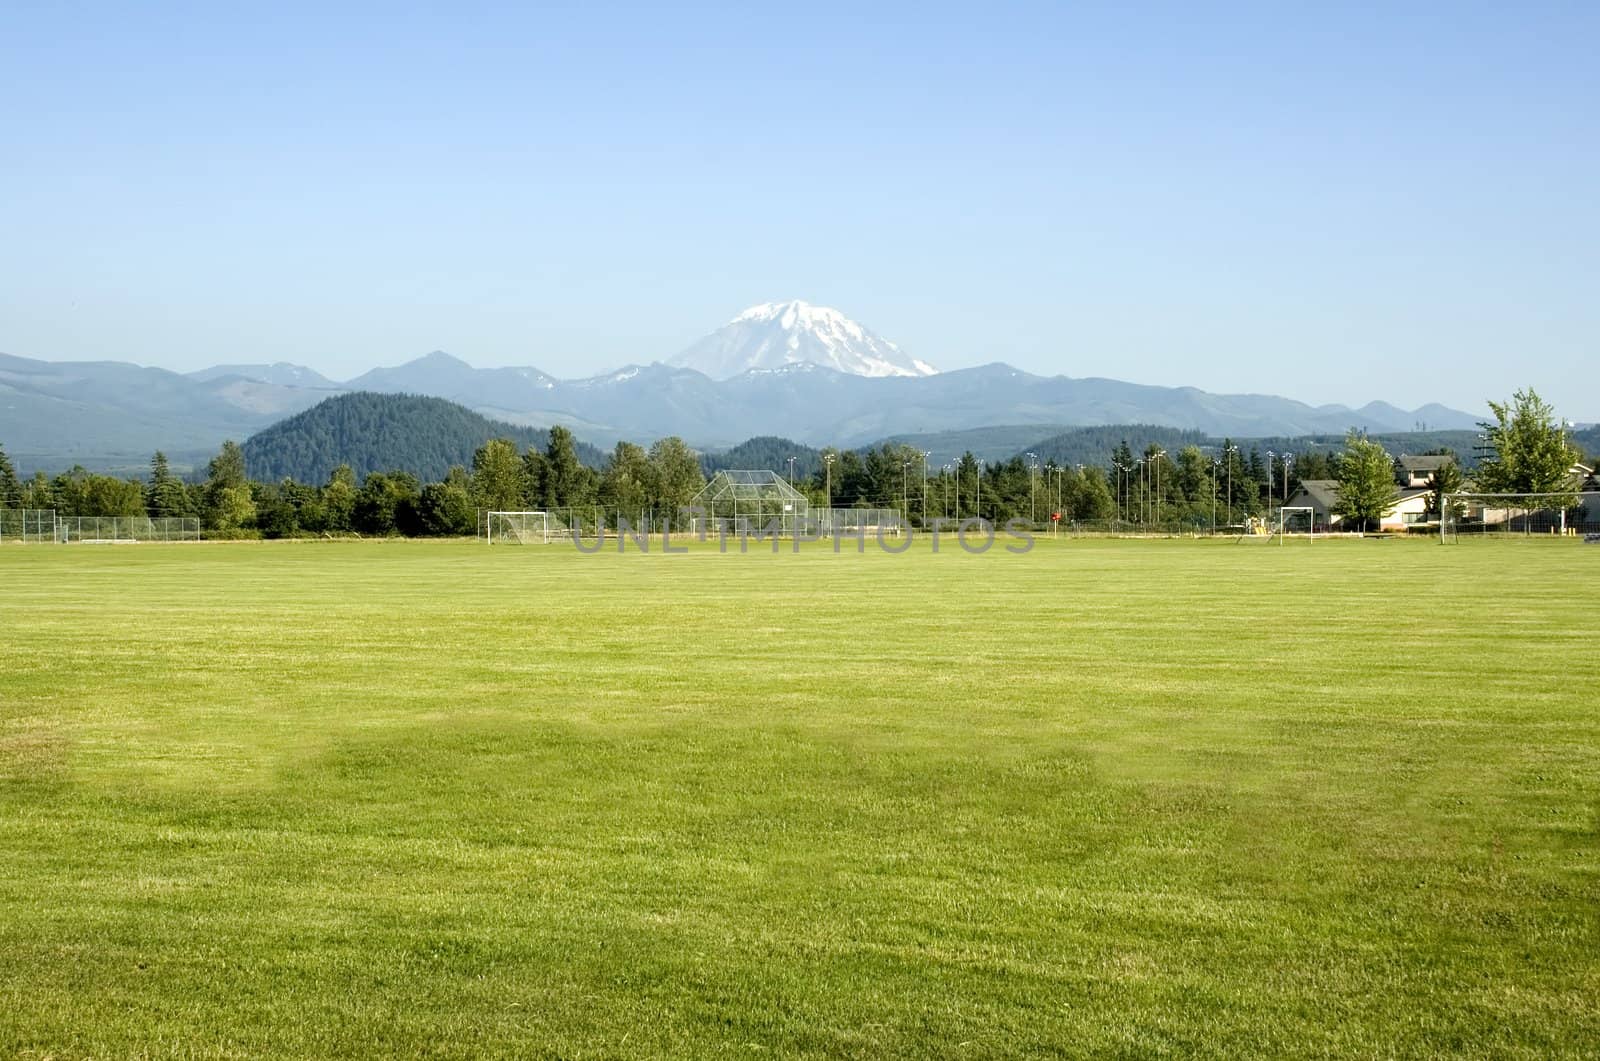 Mount Rainier looms large over the sports fields in this rural Washington town.